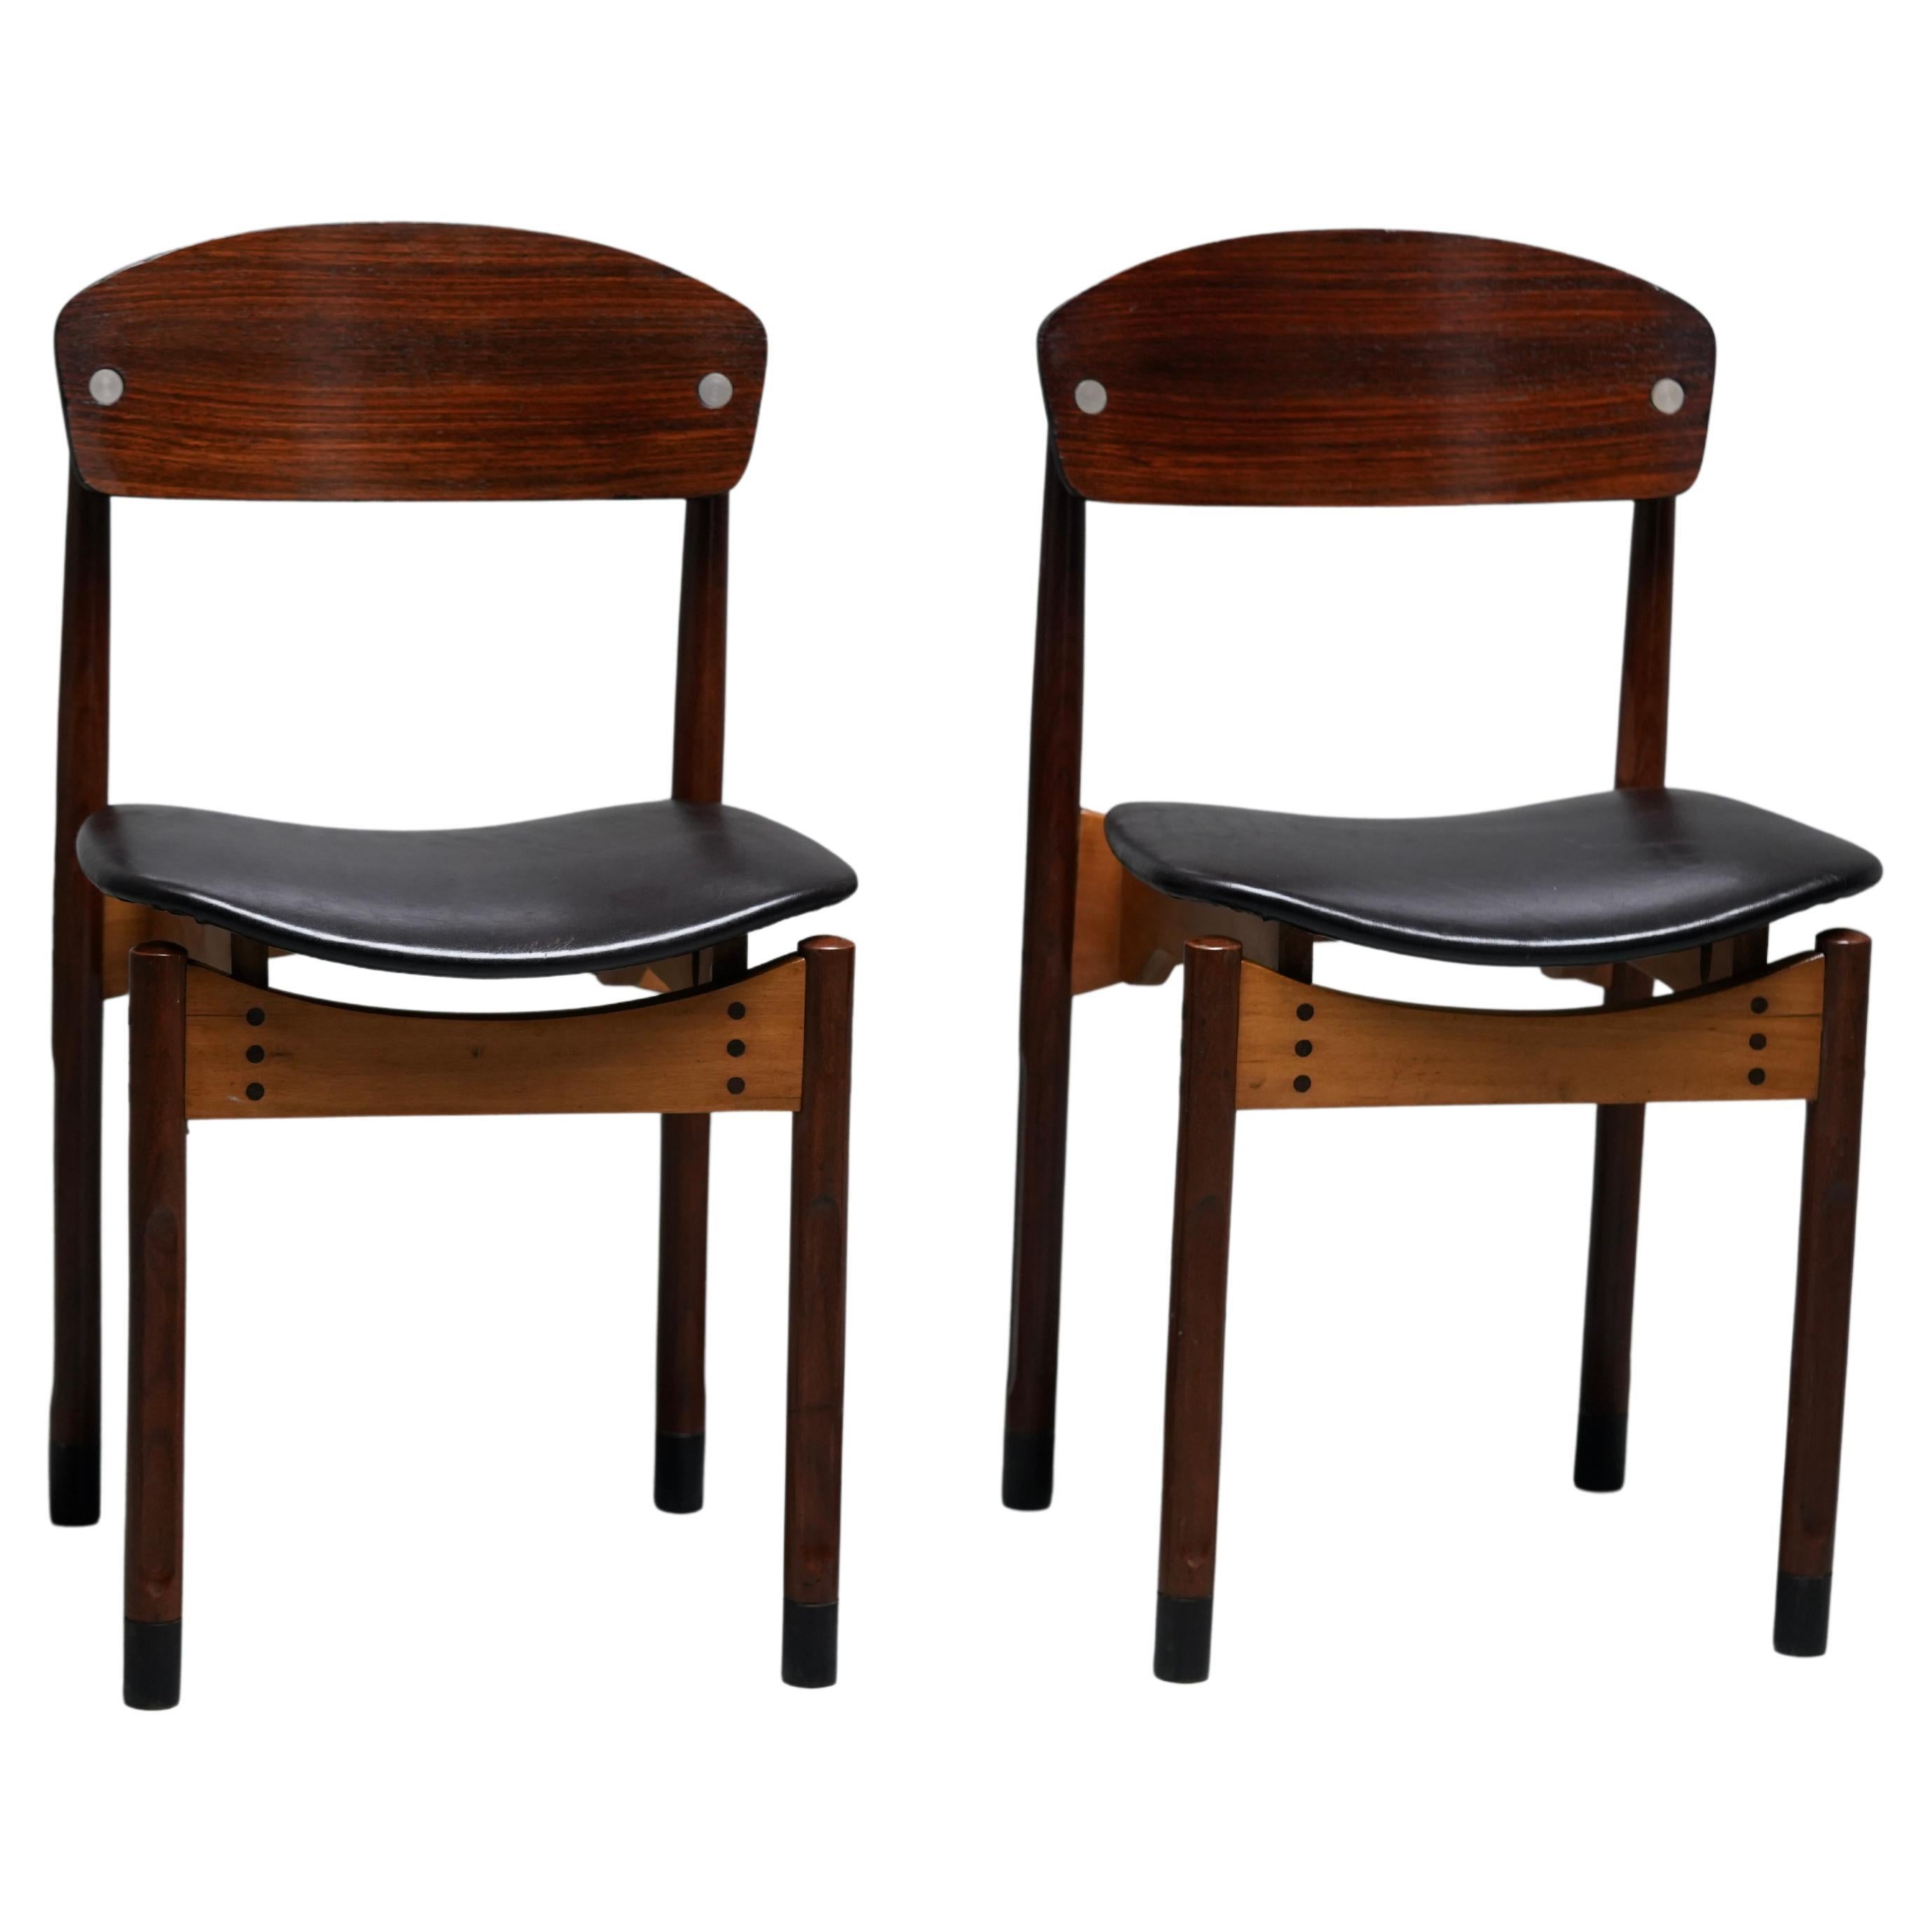 Set of 2 Diningroom Chairs in Teak, Mahogany and faux leather, Italty, 1960's For Sale